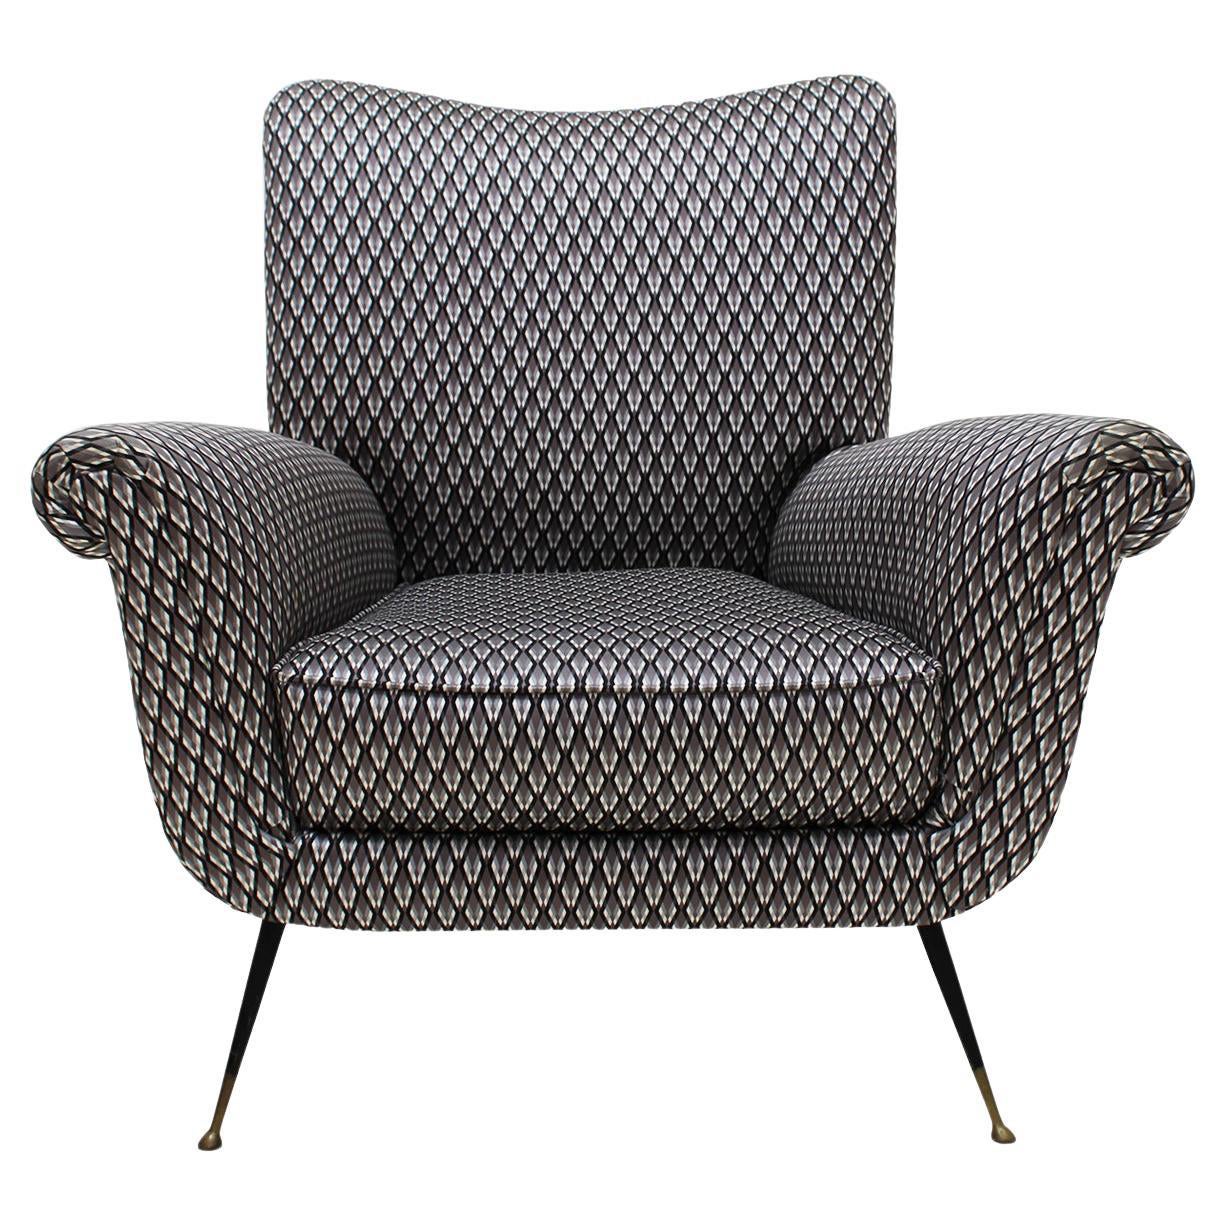 Gigi Radice Mid-Century Armchair Upholstered in Serpentino Fabric For Sale